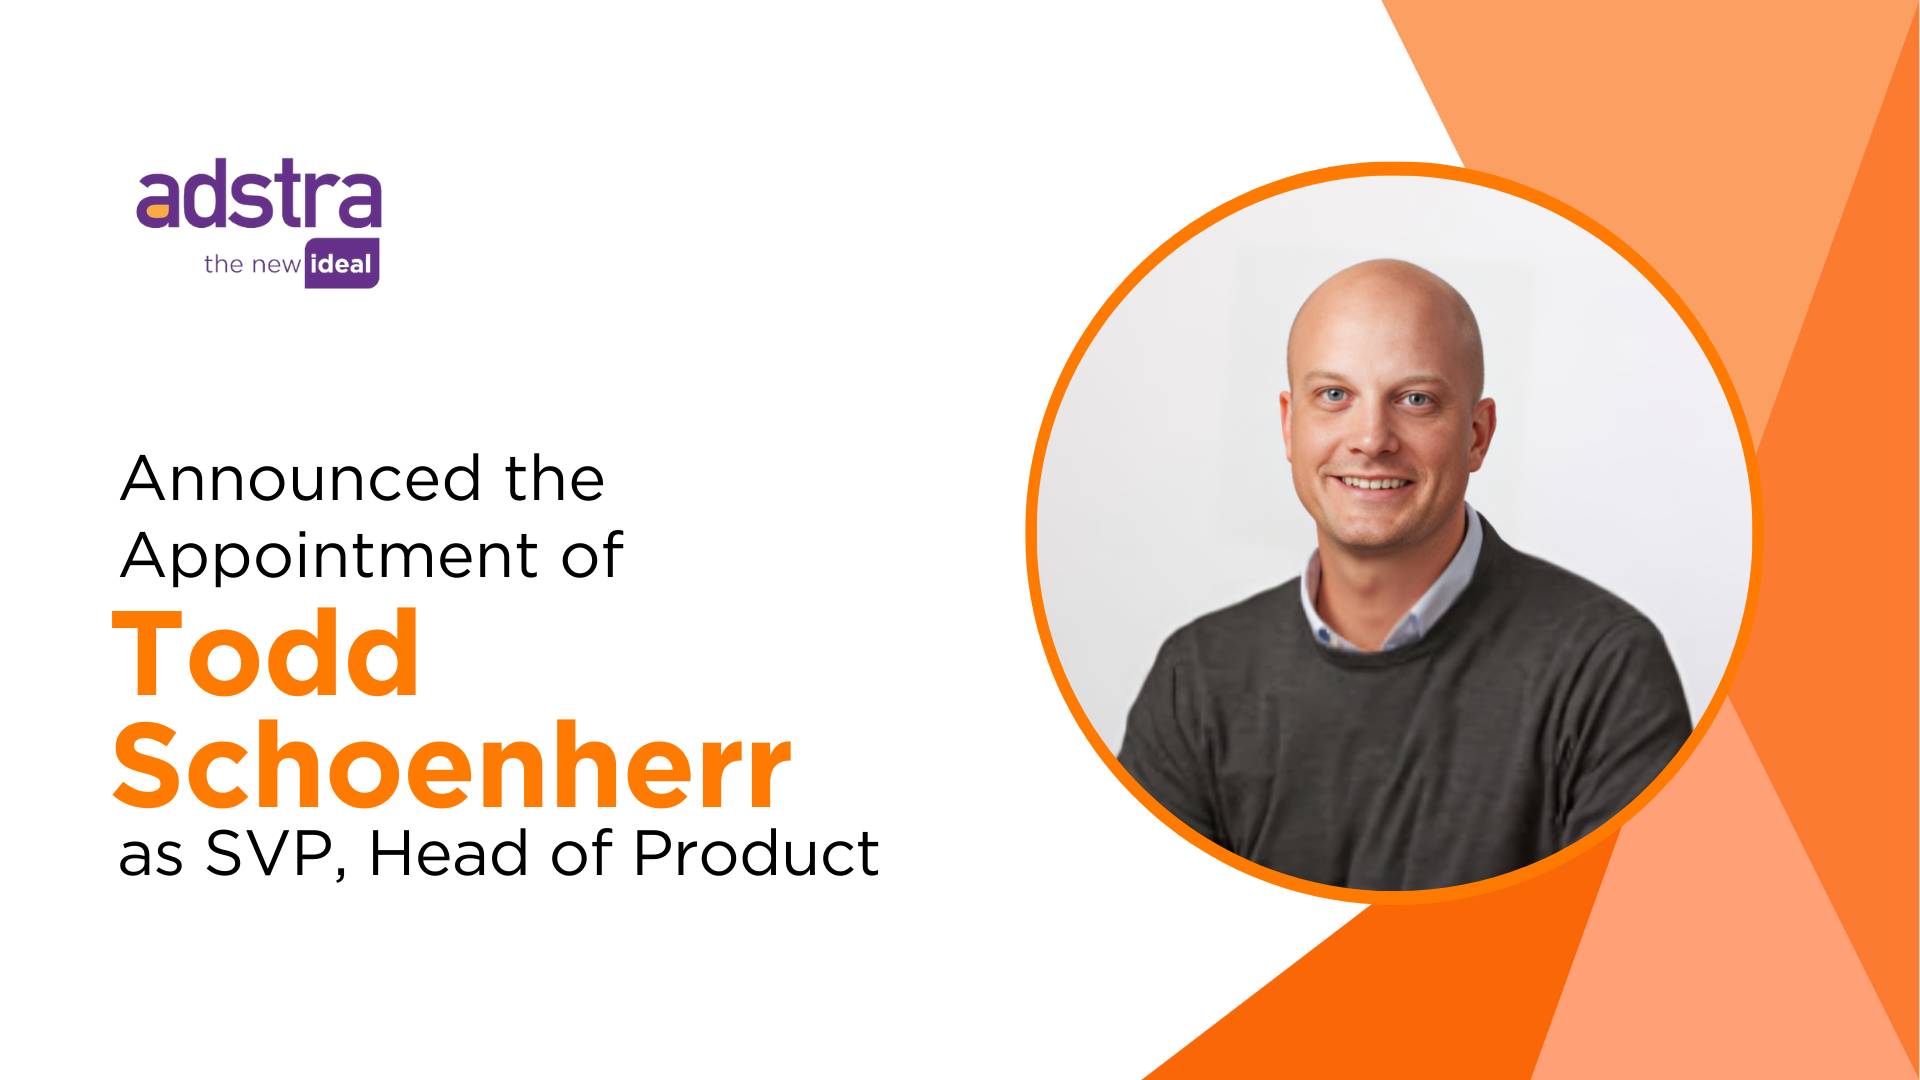 Todd Schoenherr Joins Adstra as SVP, Head of Product